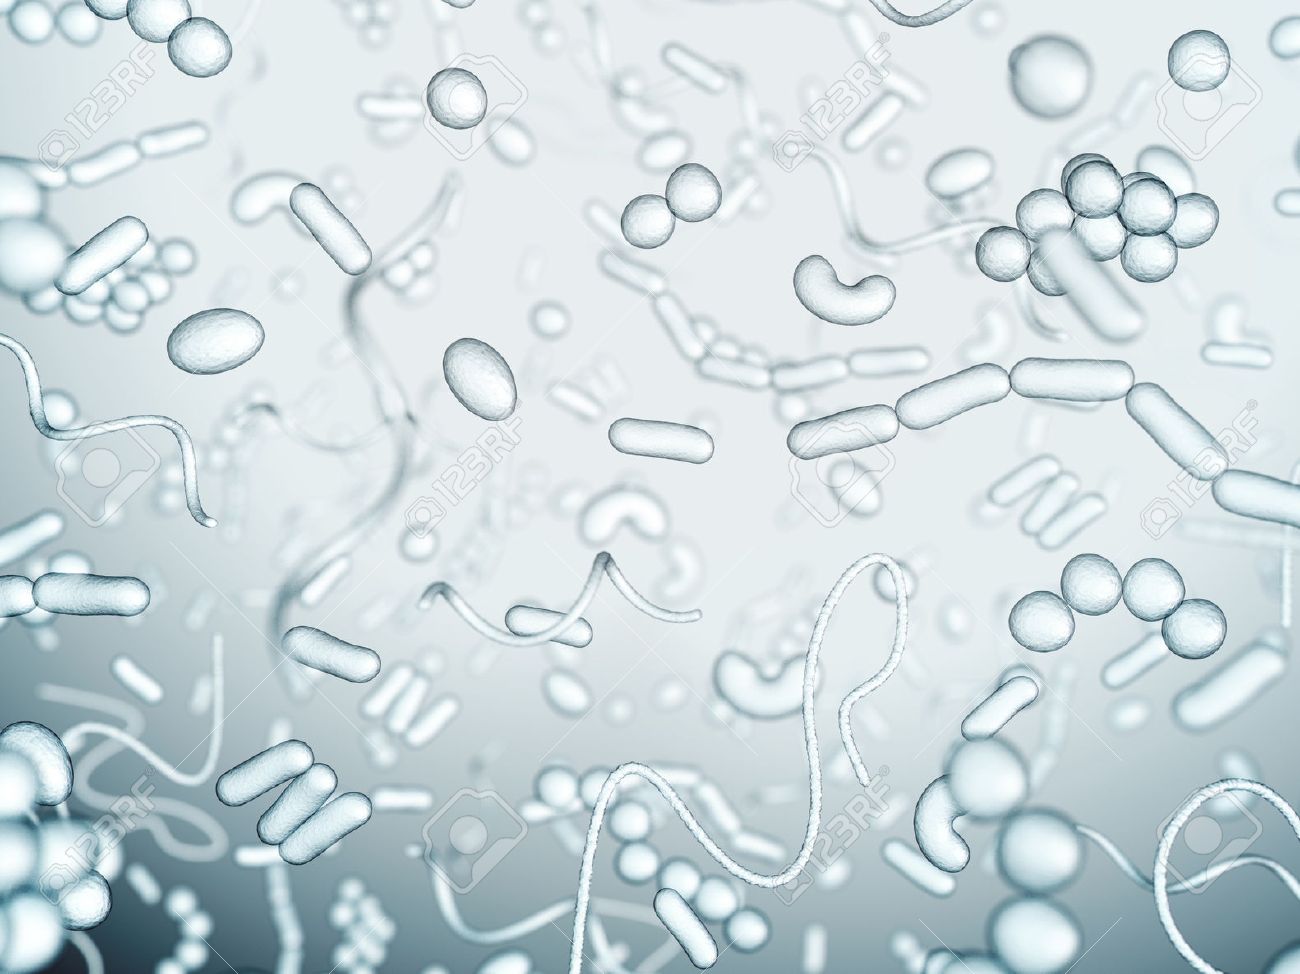 Different Types Of Bacteria On A Light Background Stock Photo